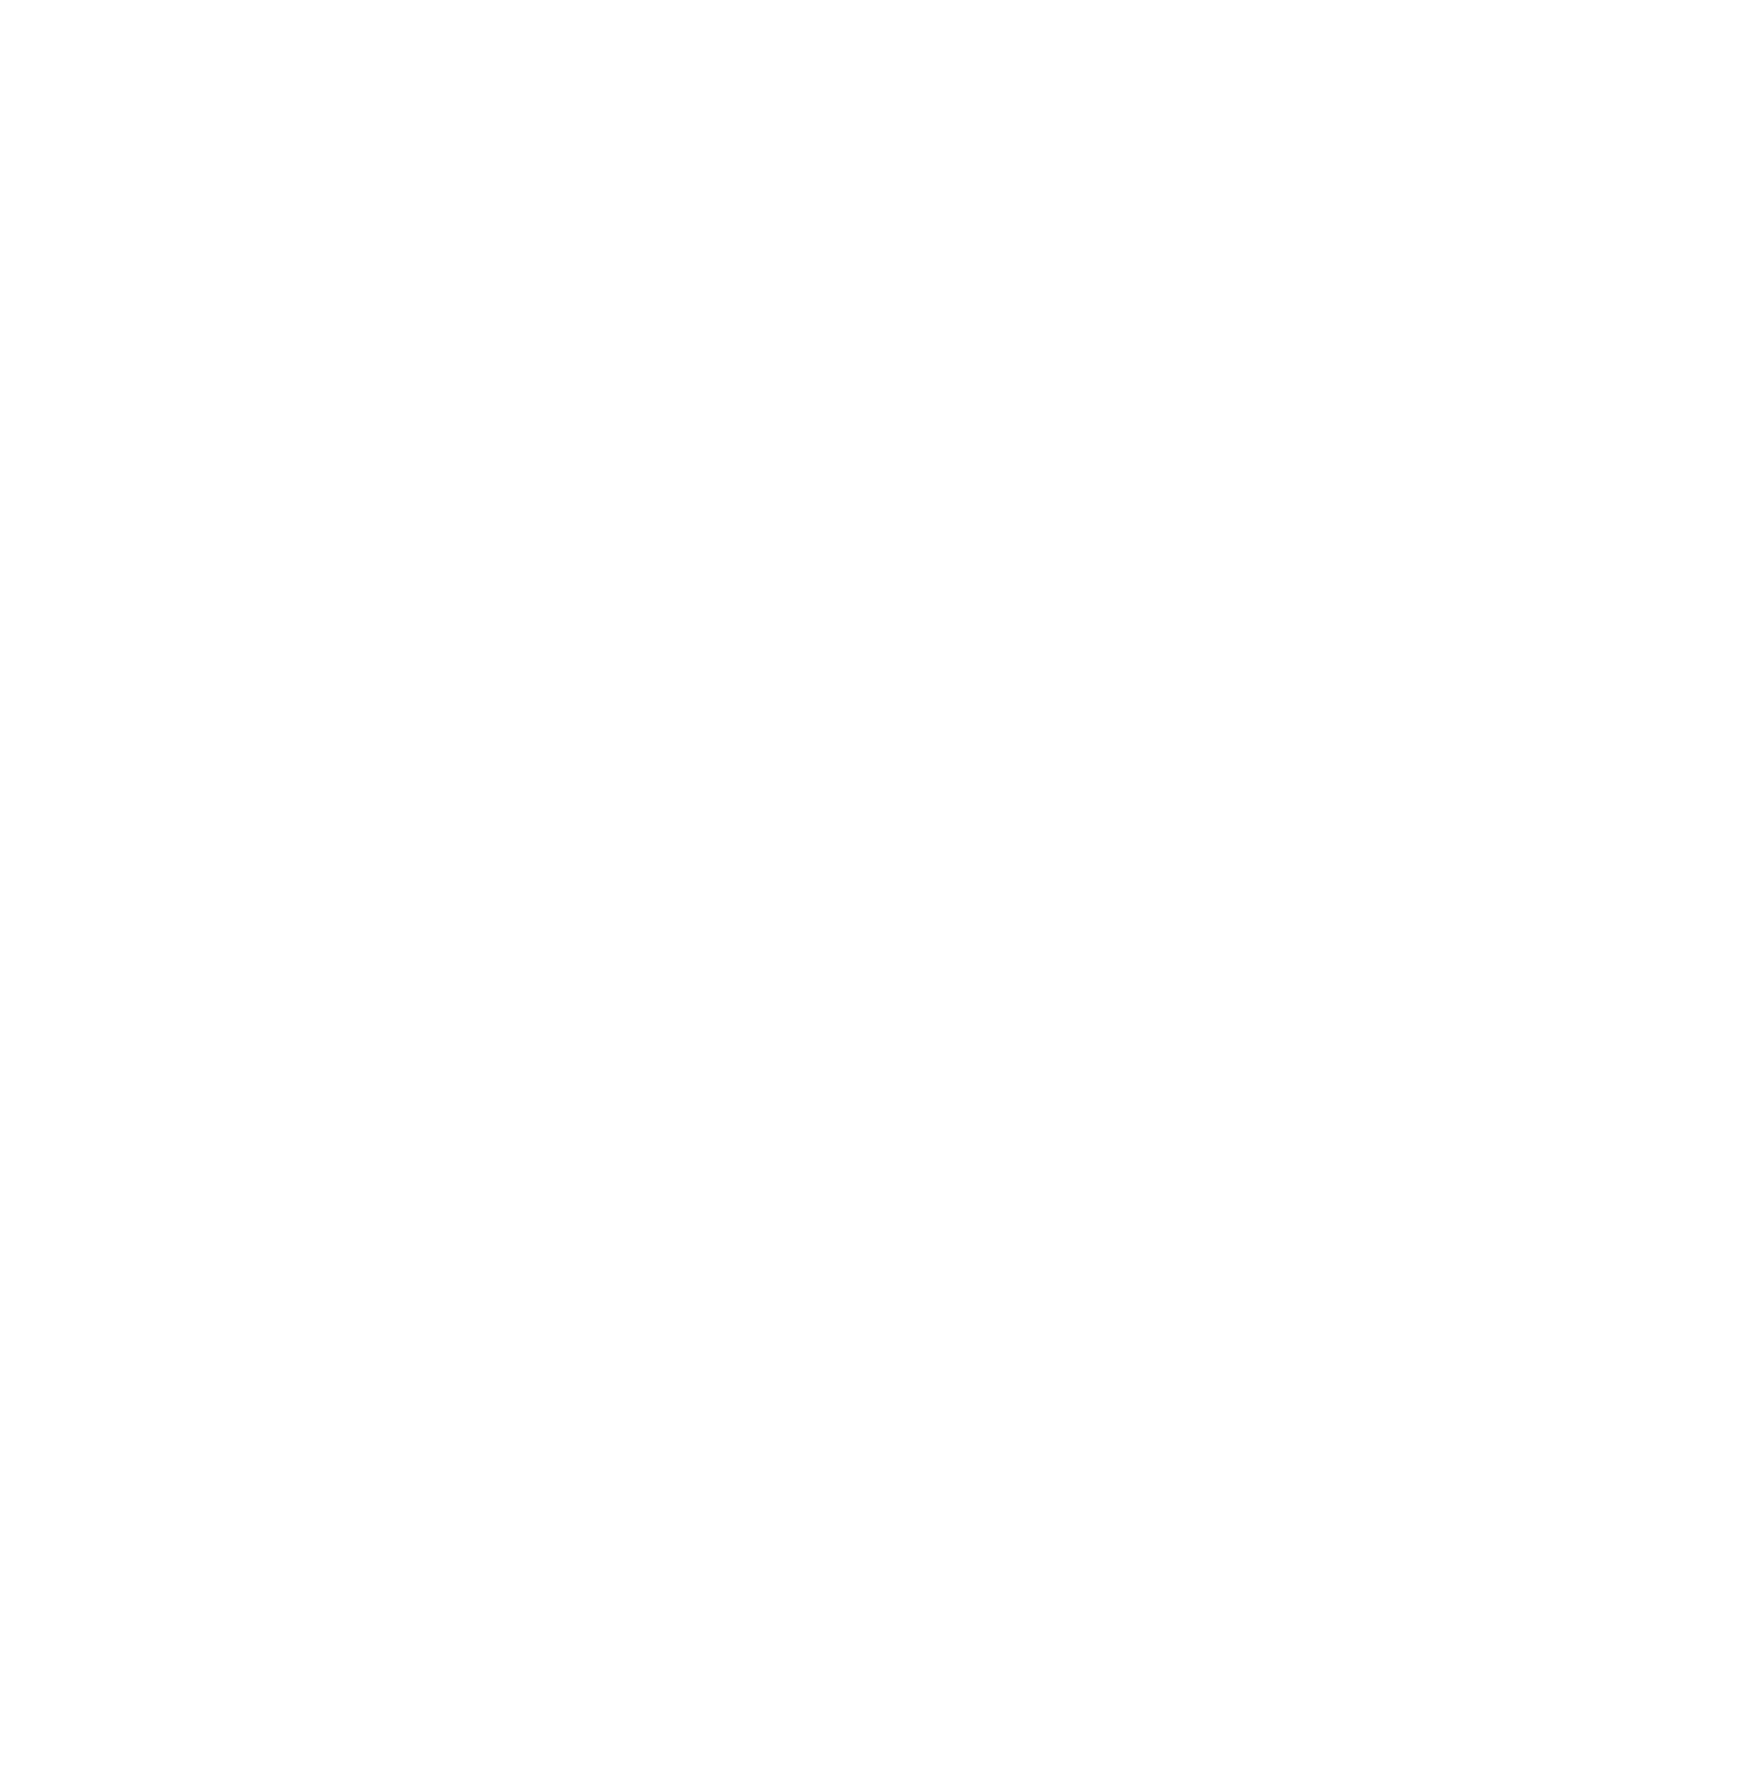 VK Therapy